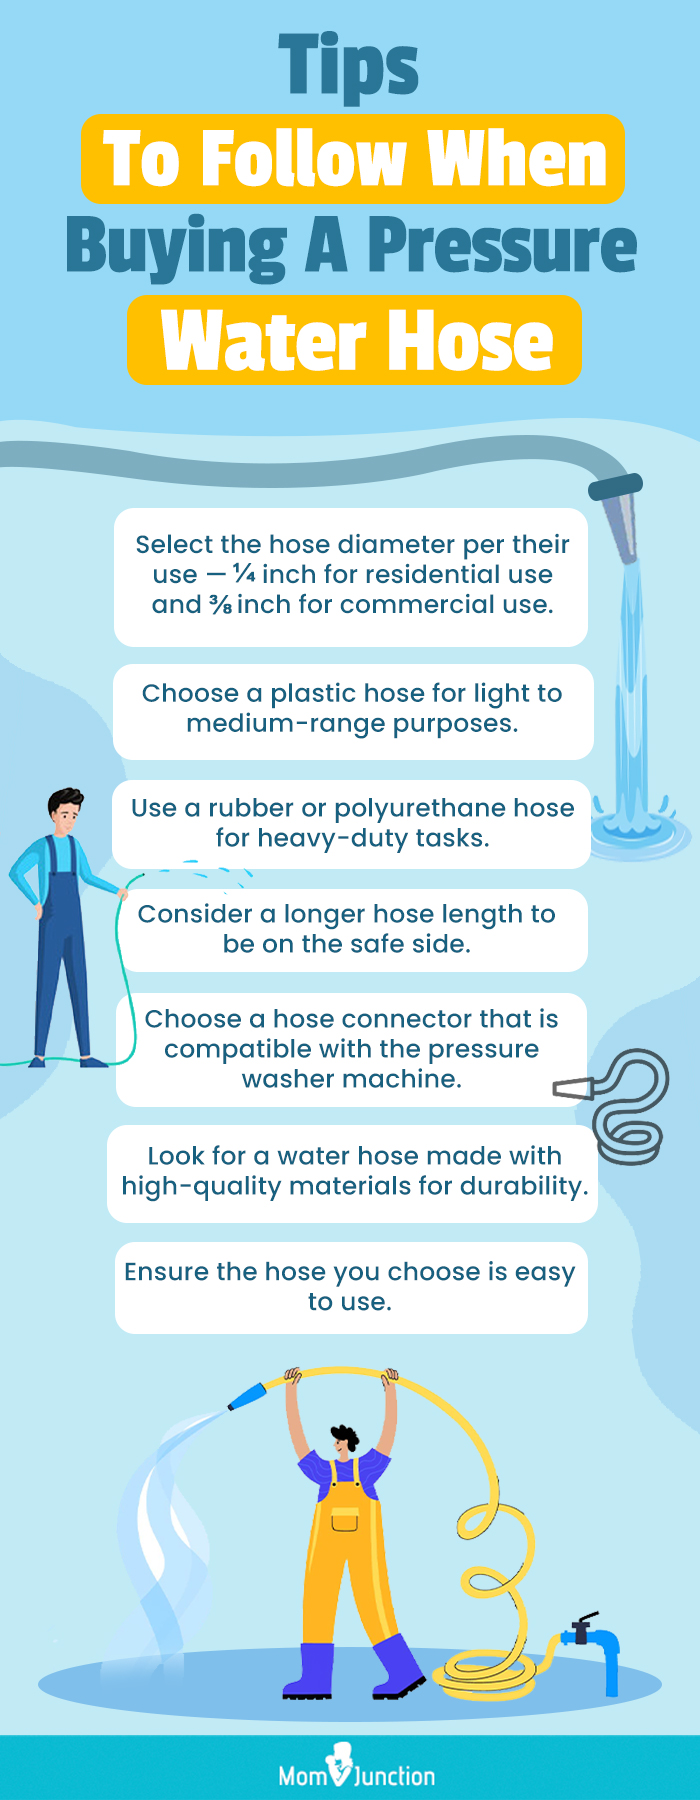 Tips To Follow When Buying A Pressure Water Hose (infographic)